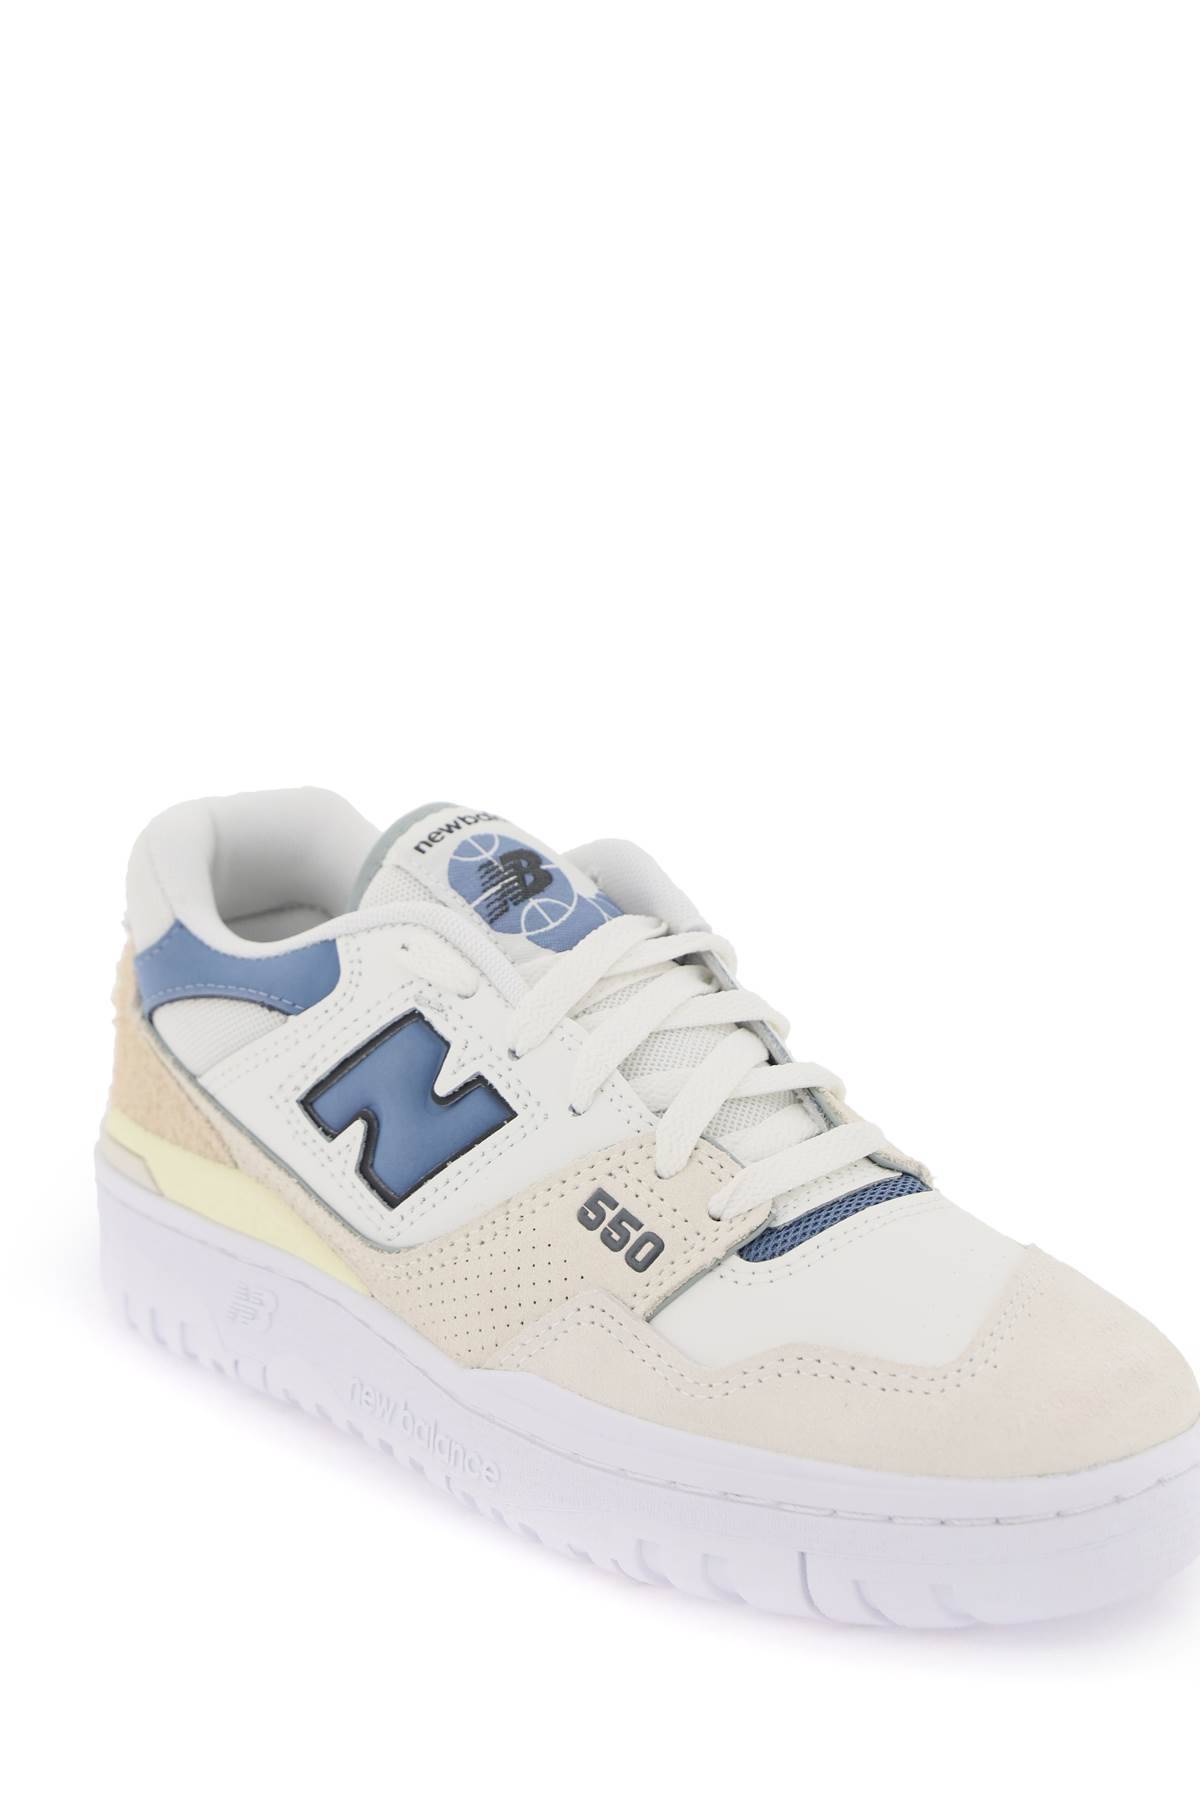 Shop New Balance 550 Sneakers In Beige,white,blue